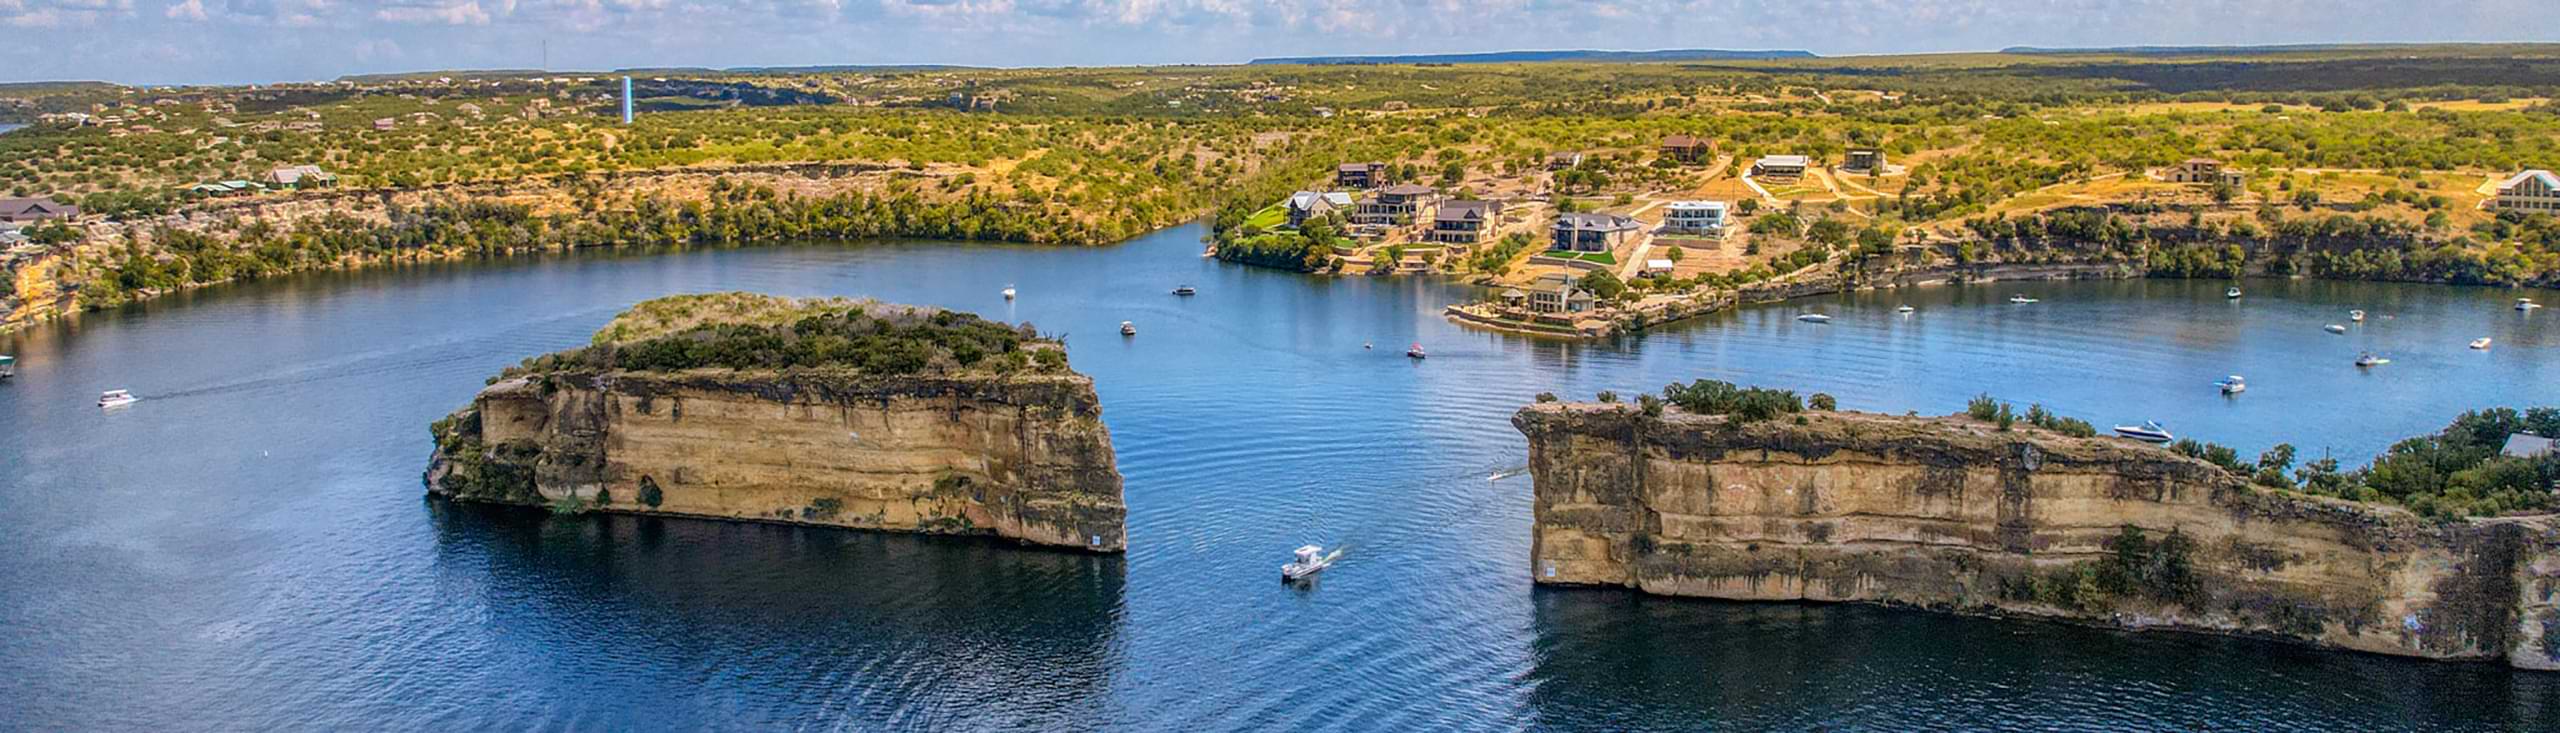 View Lakefront lots for sale at Sportsman's World on Possum Kingdom Lake